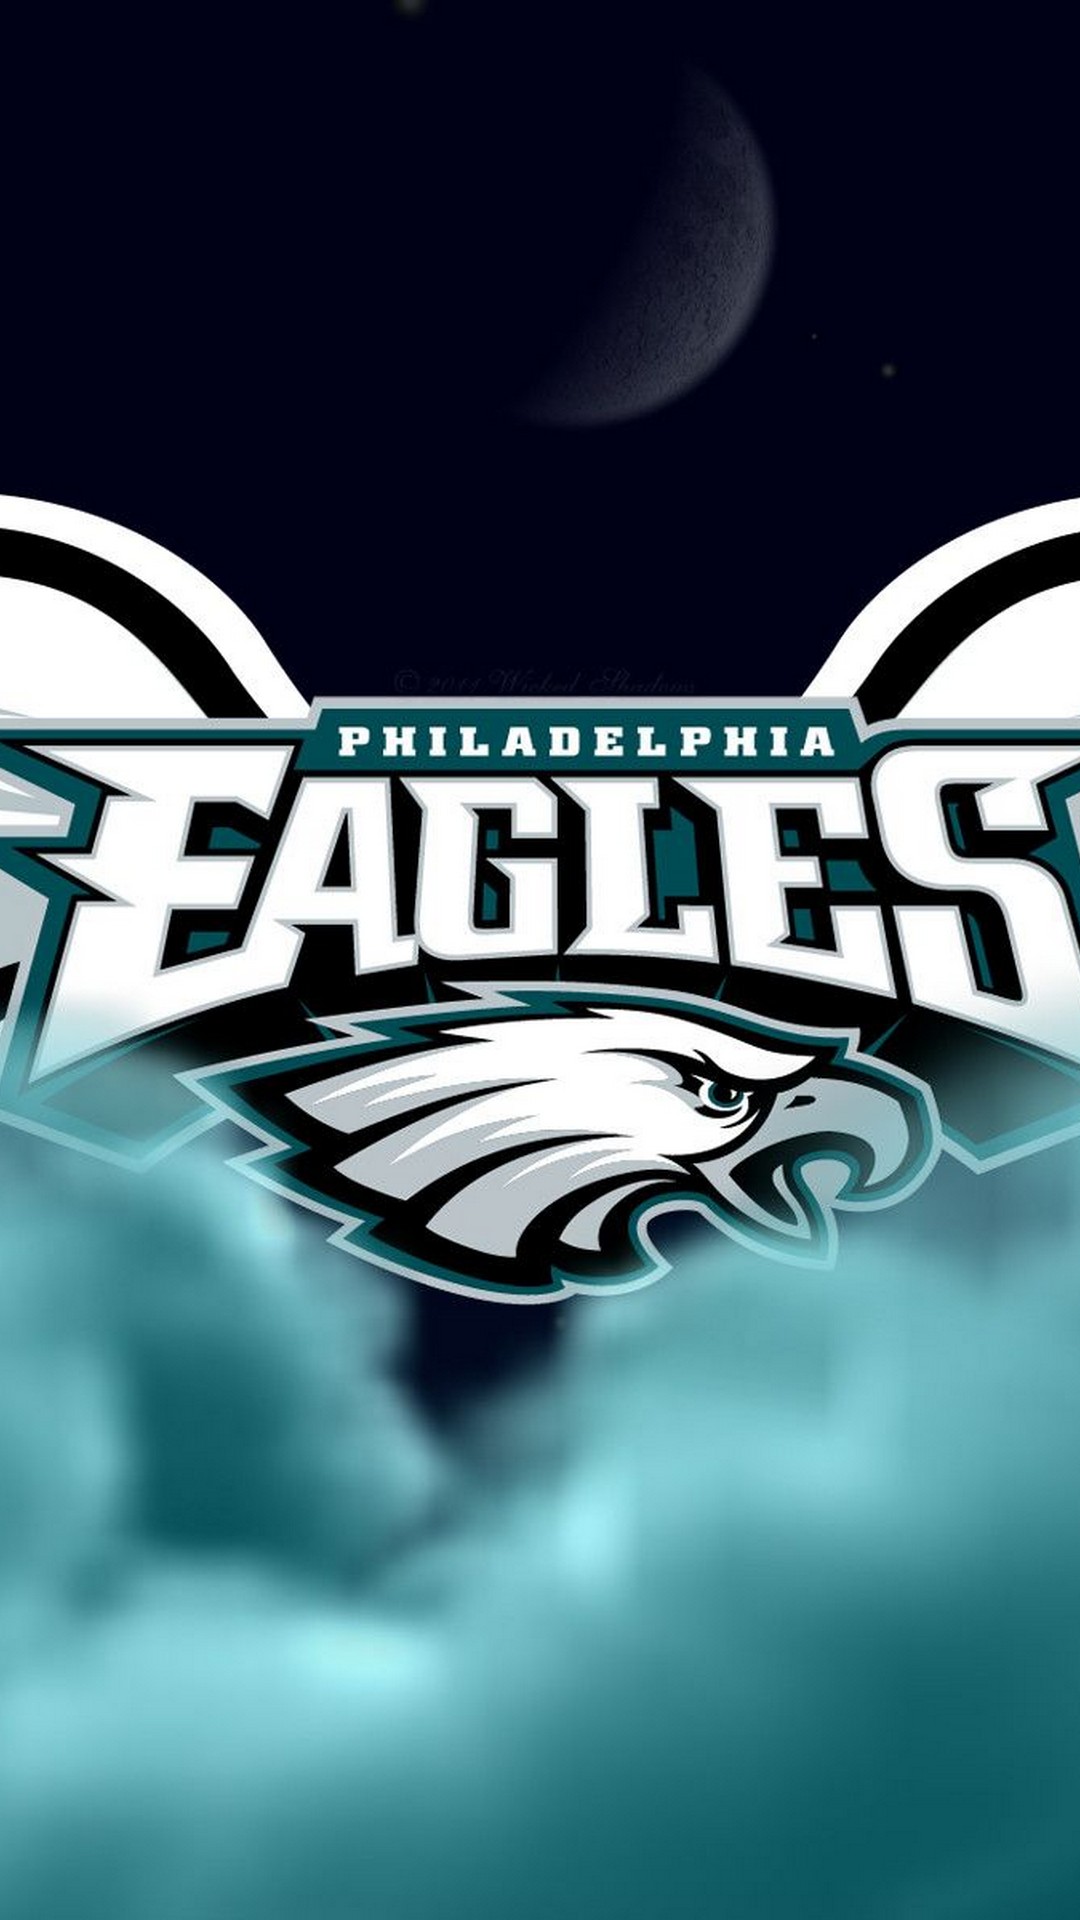 NFL Eagles iPhone X Wallpaper With Resolution 1080X1920 pixel. You can make this wallpaper for your Mac or Windows Desktop Background, iPhone, Android or Tablet and another Smartphone device for free